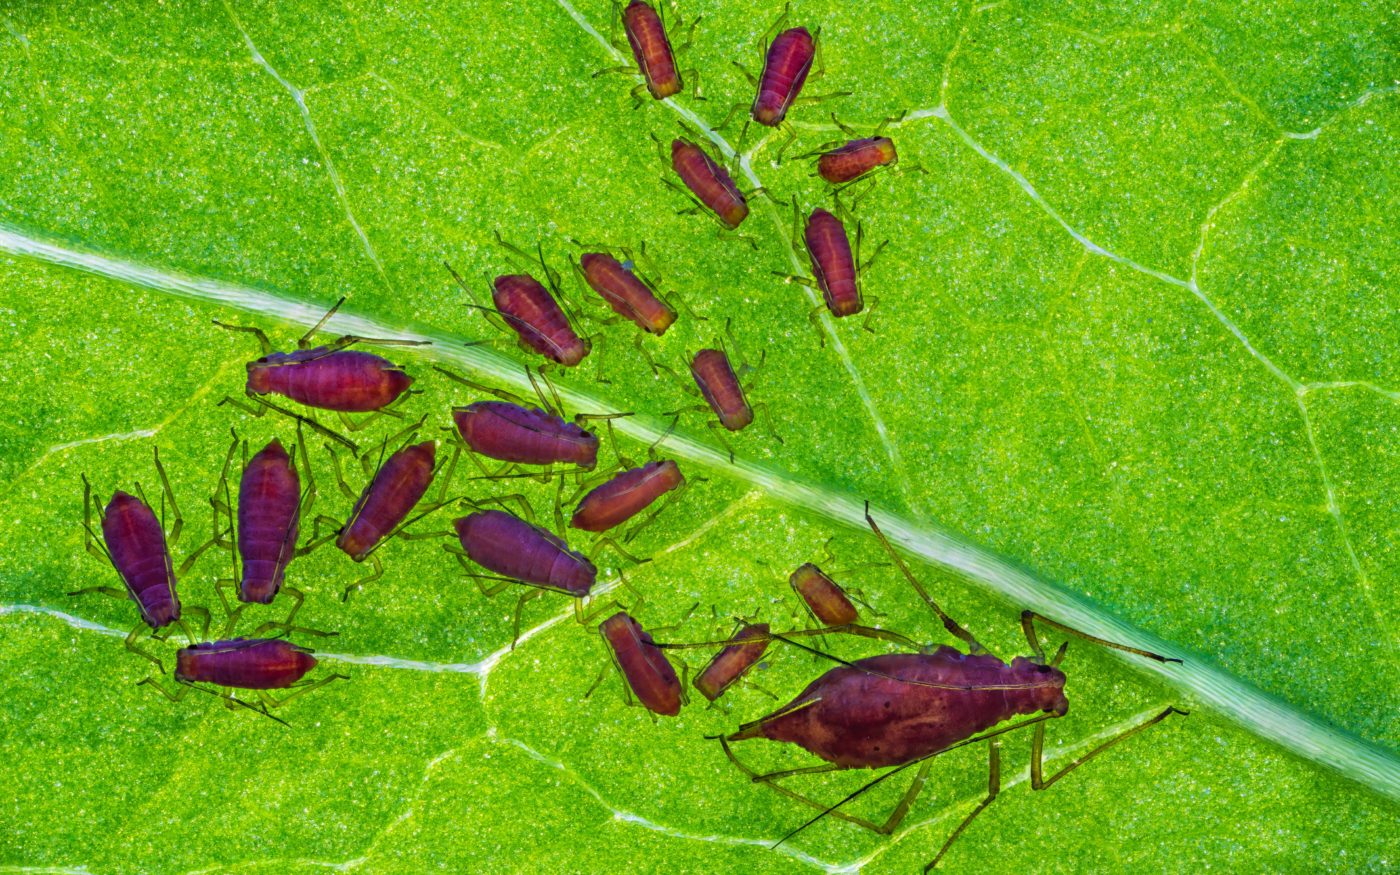 Aphid family on a green leaf